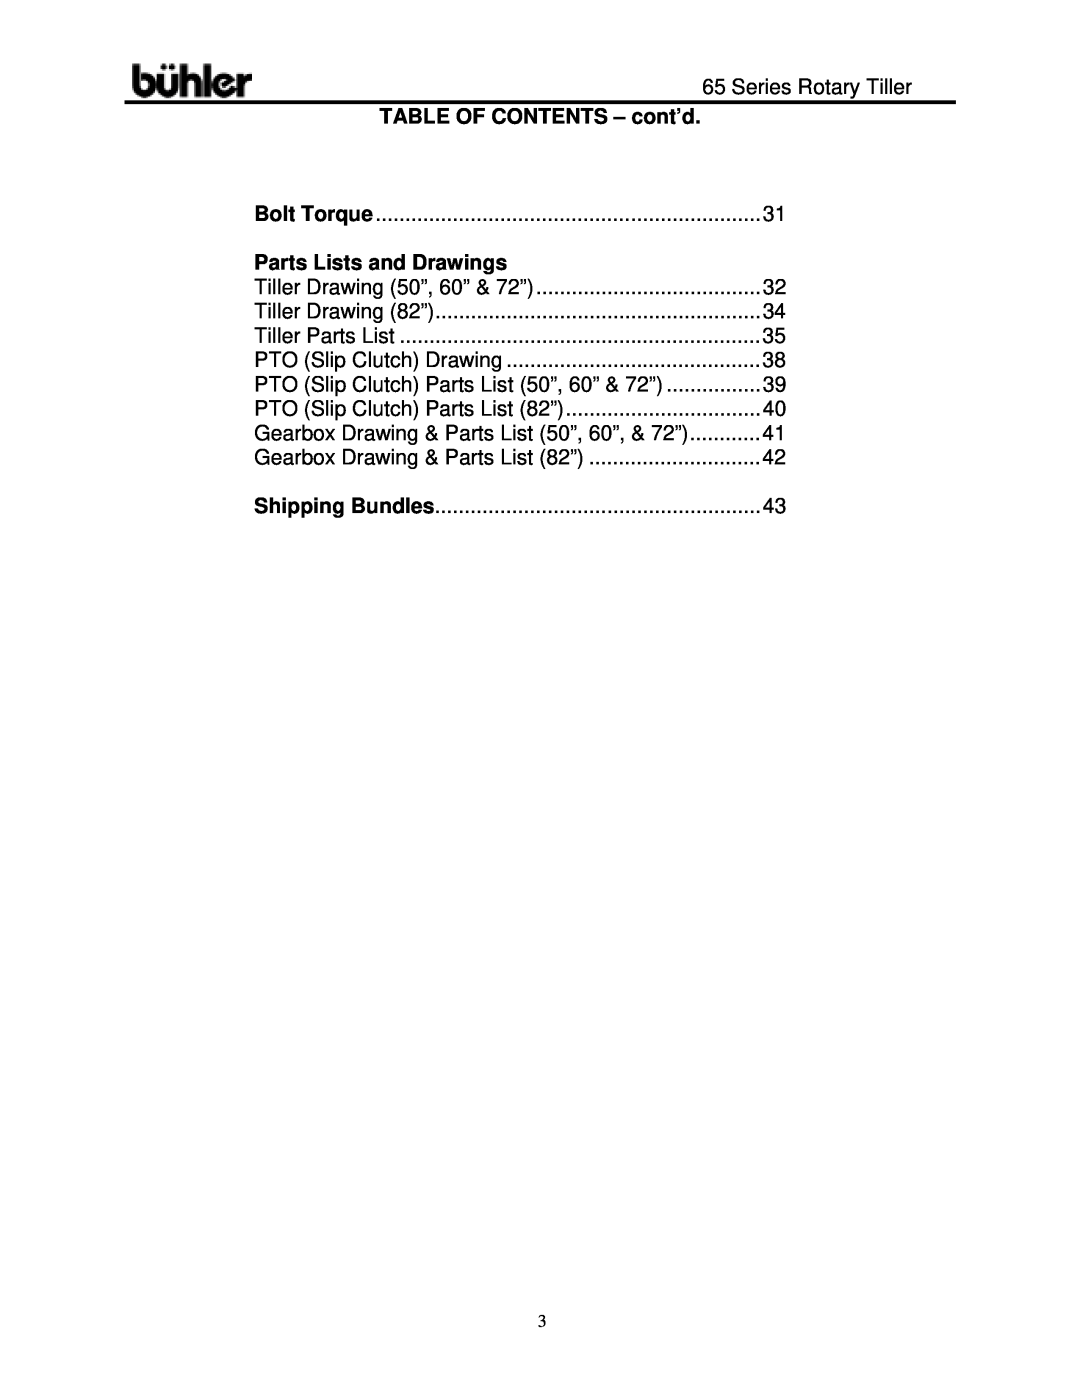 Buhler 65 Series warranty TABLE OF CONTENTS - cont’d, Parts Lists and Drawings 